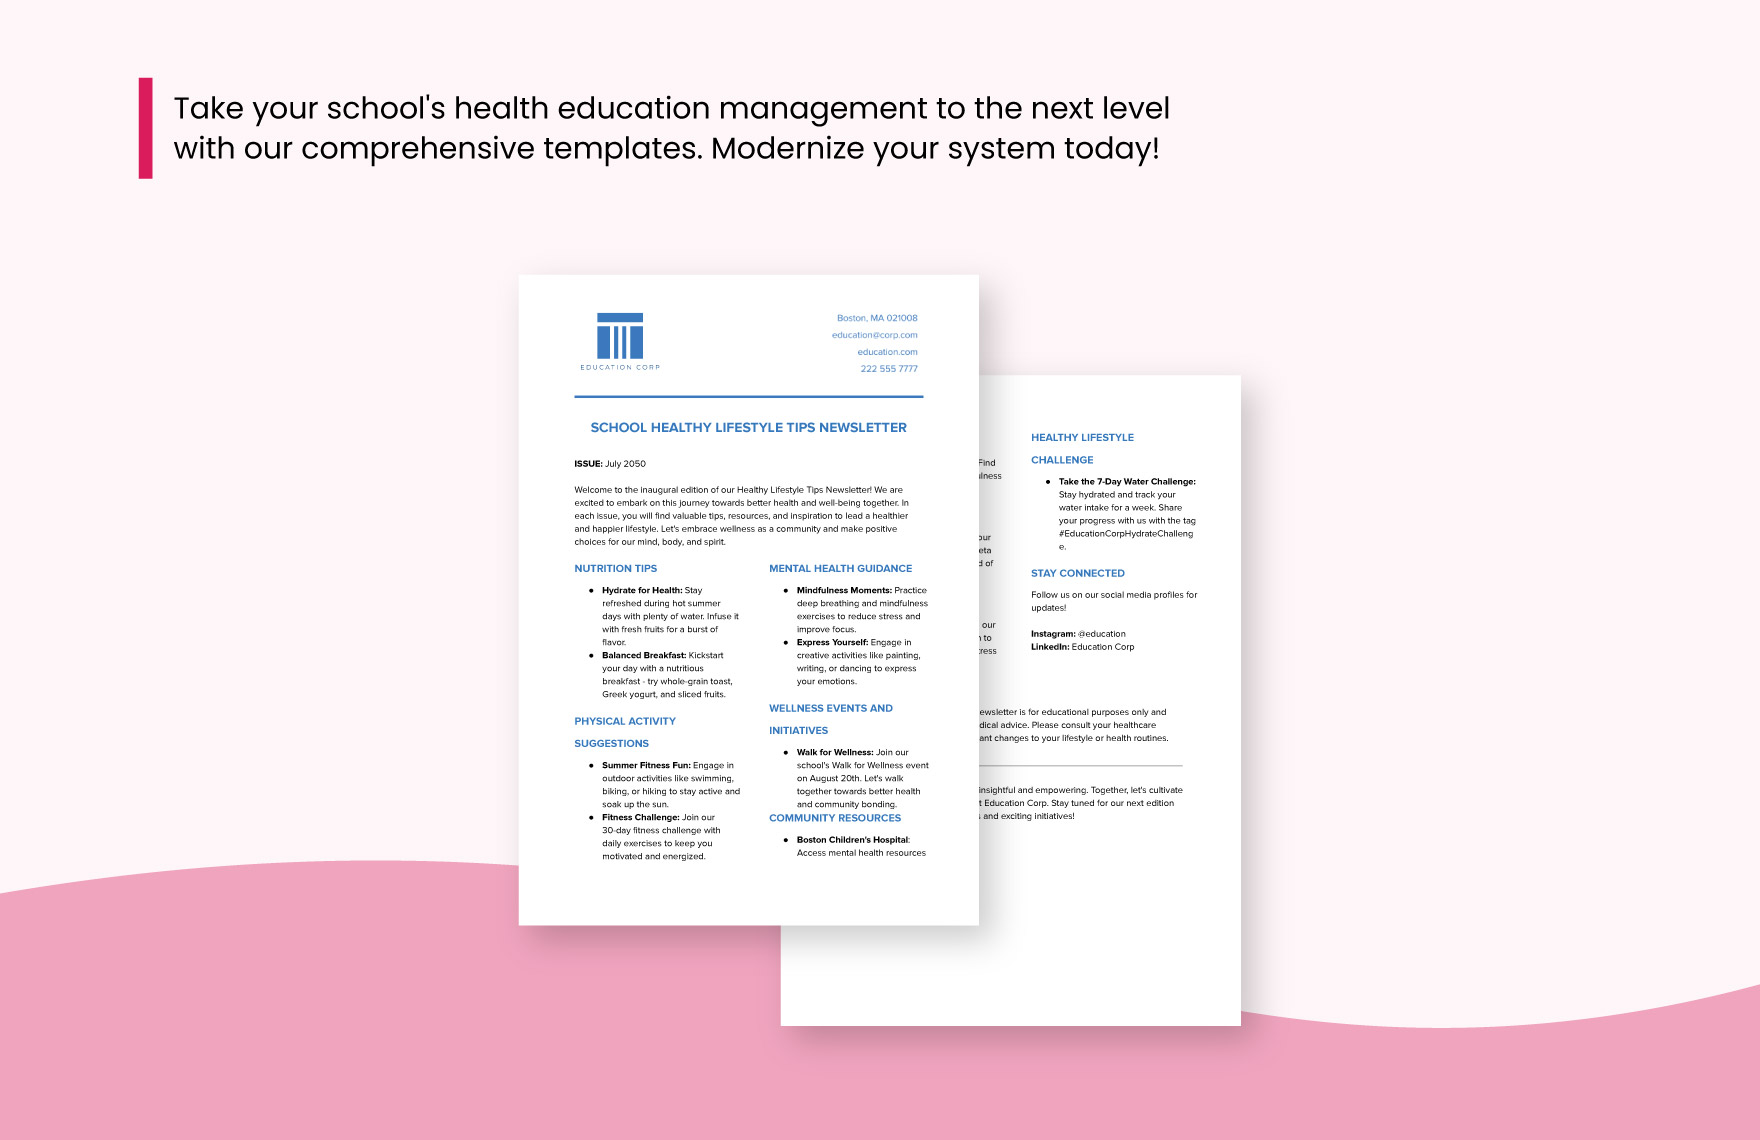 School Healthy Lifestyle Tips Newsletter Template